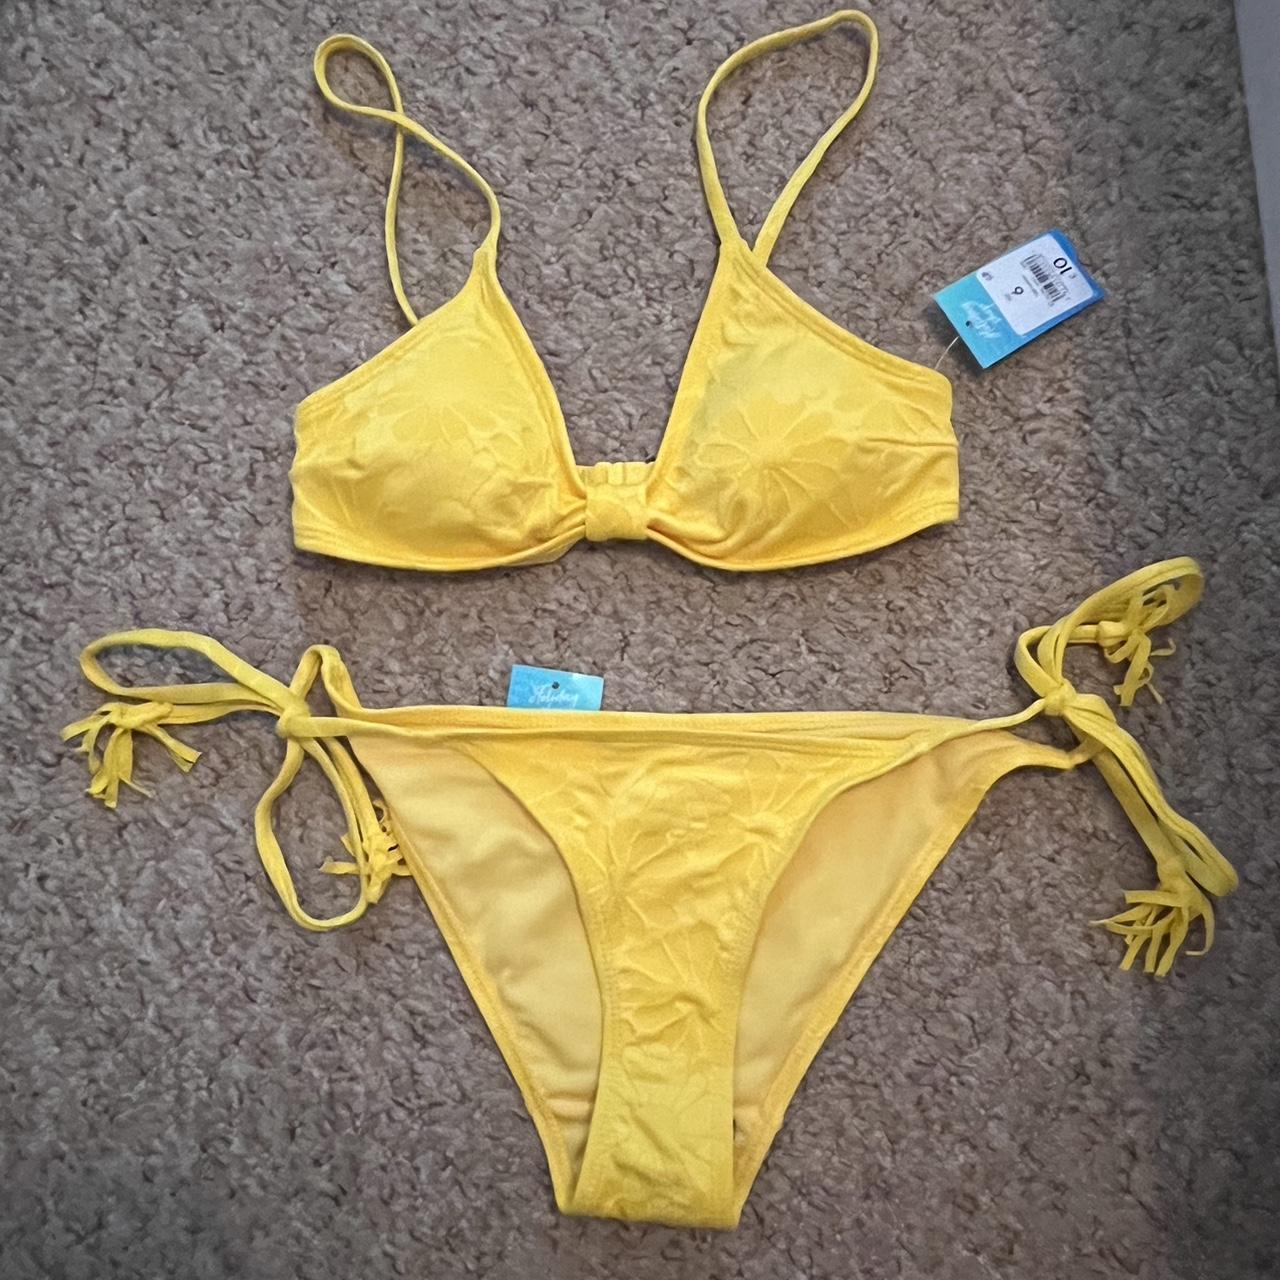 Yellow Bikinis New With Tags Both A Size 6 Depop